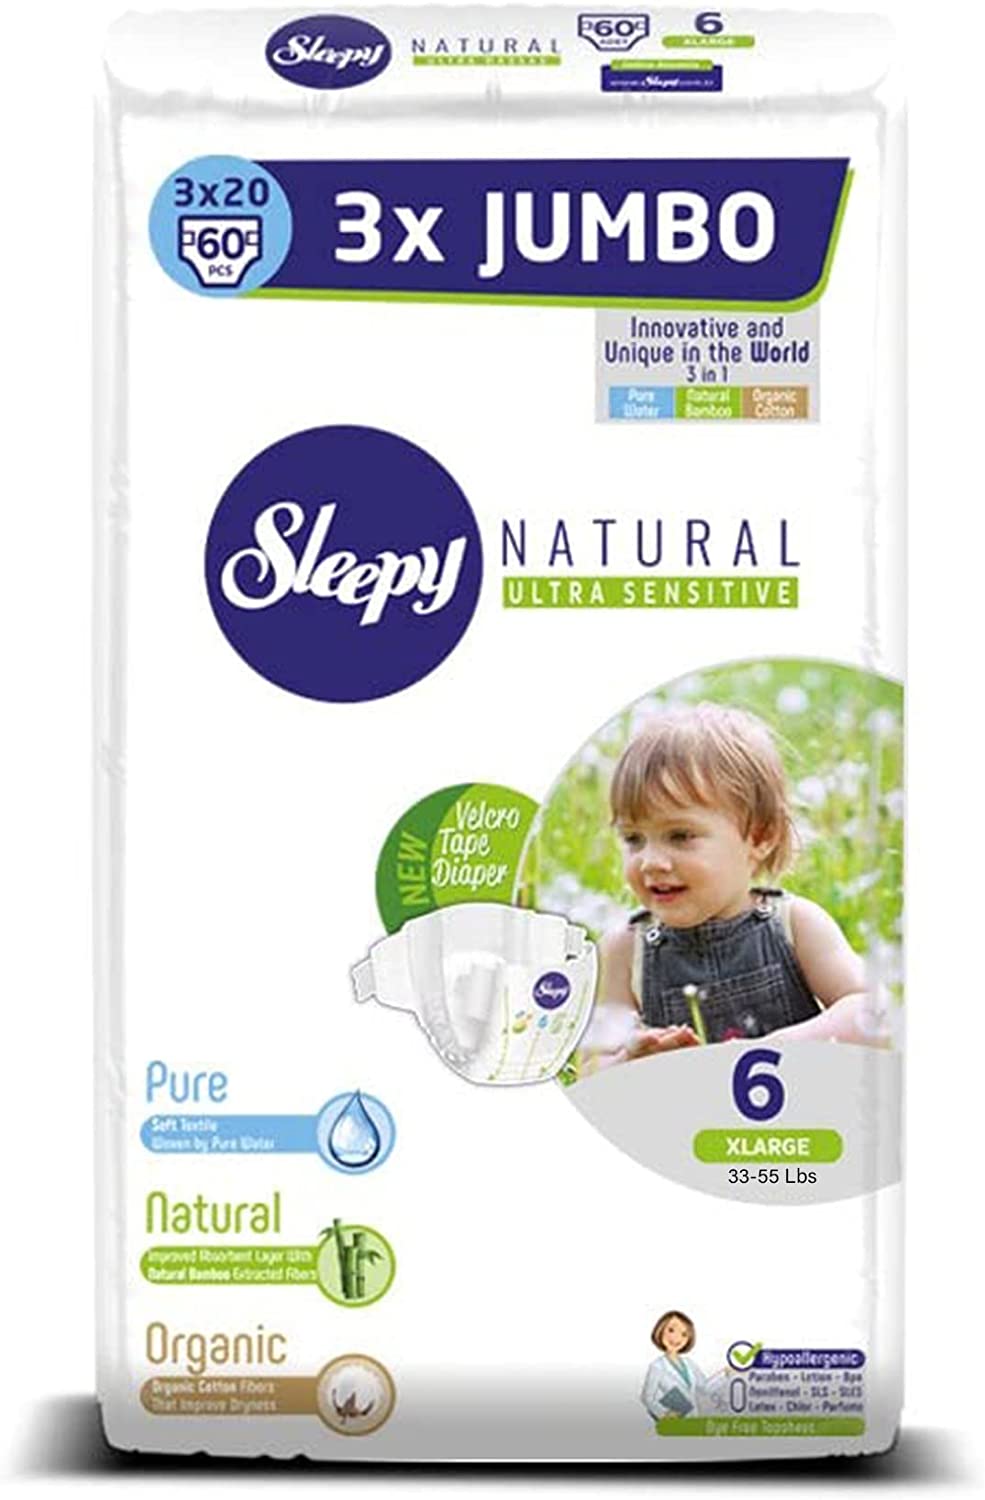 SOHO|Sleepy 3X Jumbo Natural Baby Diapers, Made from Organic Cotton and Bamboo Extract, Ultimate Comfort and Dryness, Diapers 60 Count – Size 6 XL Diapers, Child Weight 15-25 kgs (Size 6 XL)